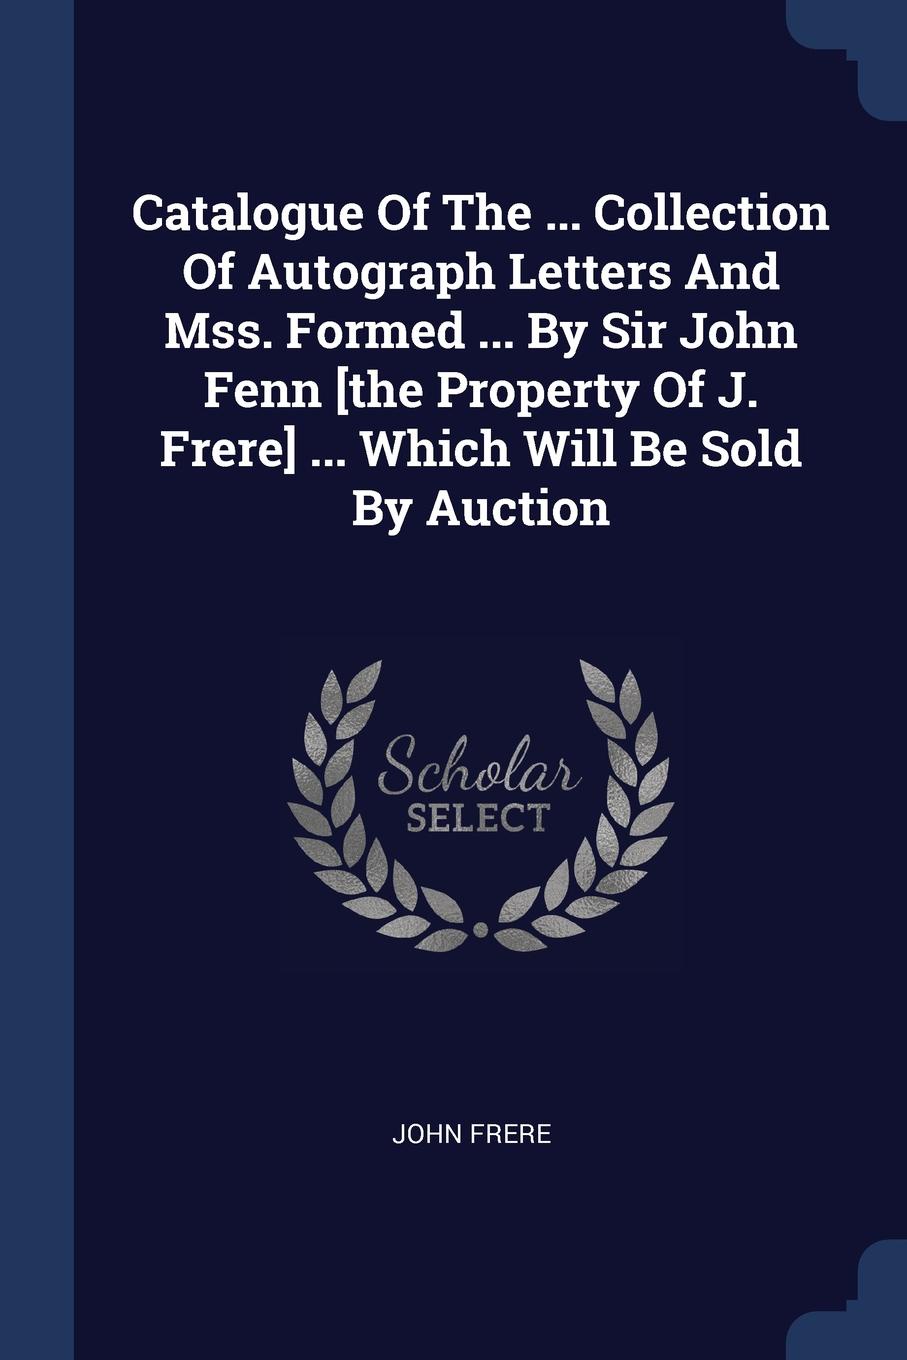 Catalogue Of The ... Collection Of Autograph Letters And Mss. Formed ... By Sir John Fenn .the Property Of J. Frere. ... Which Will Be Sold By Auction